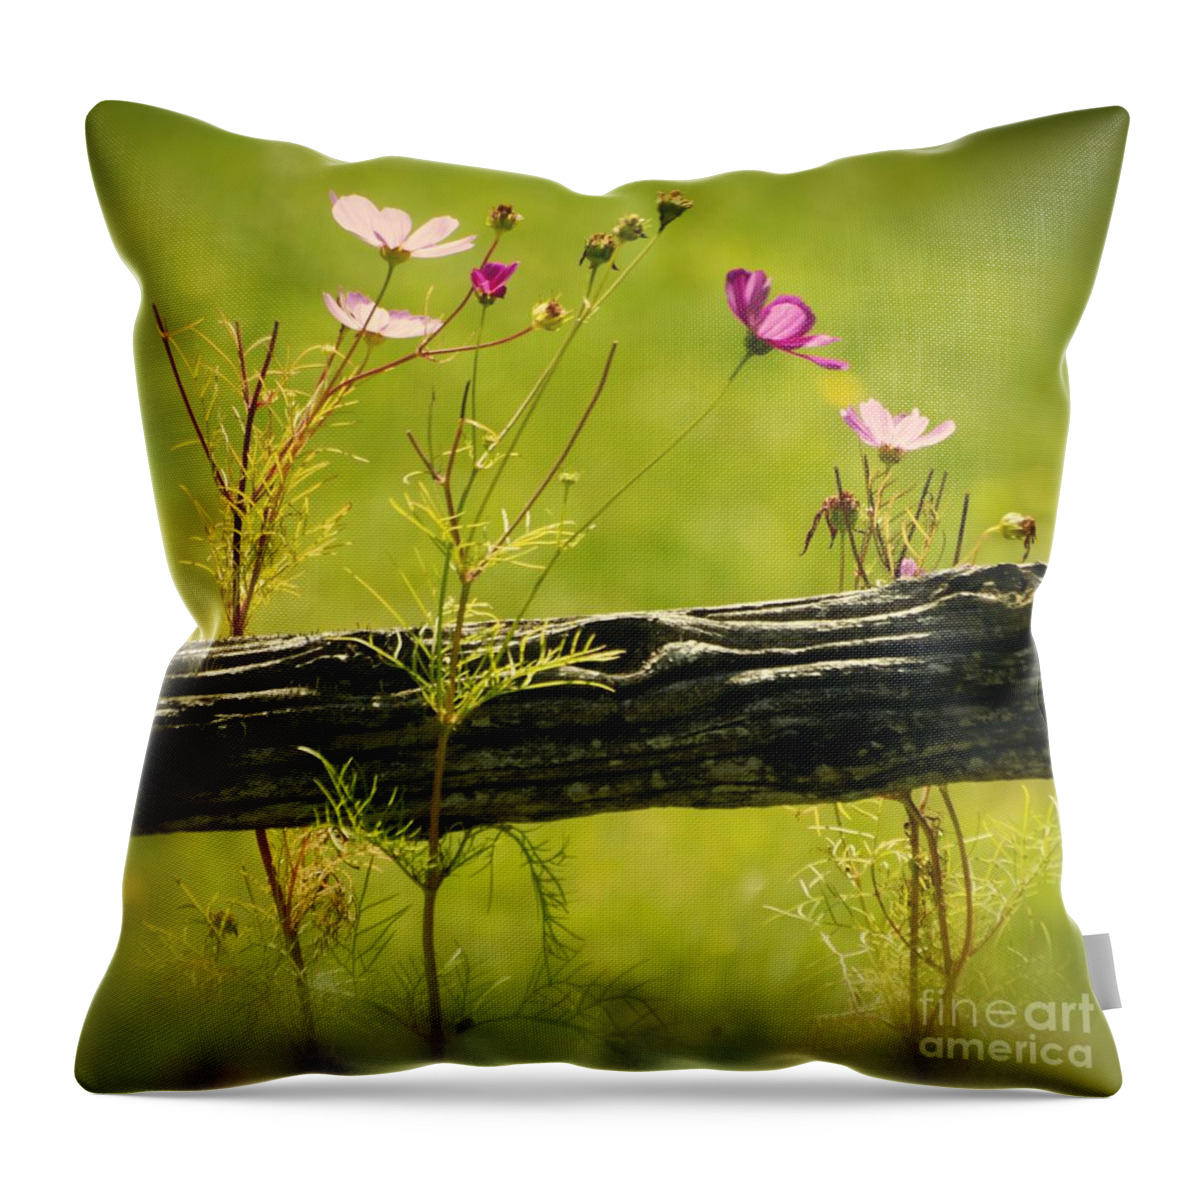 Green Throw Pillow featuring the photograph Emerging Beauties - 01-rgnl-sq by Variance Collections